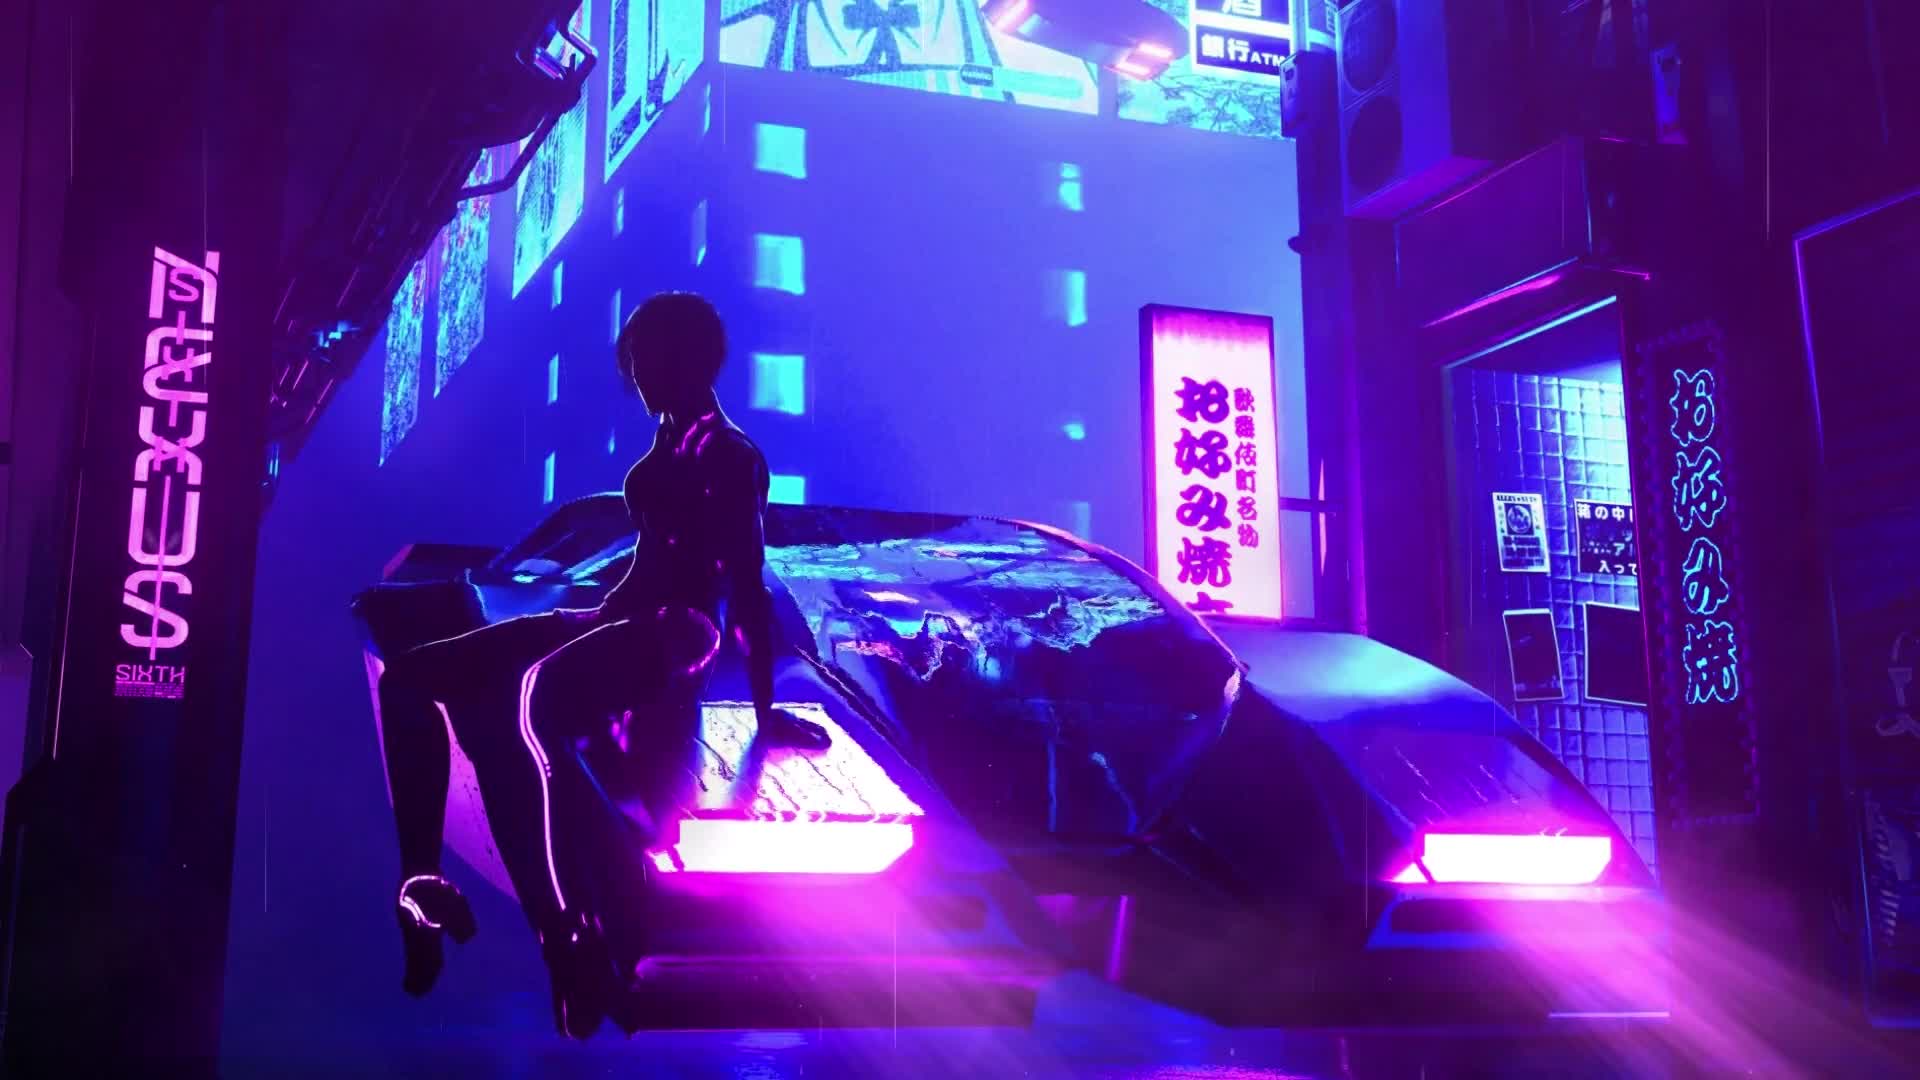 The car goes in the neon city Live Wallpaper | 2560x1440